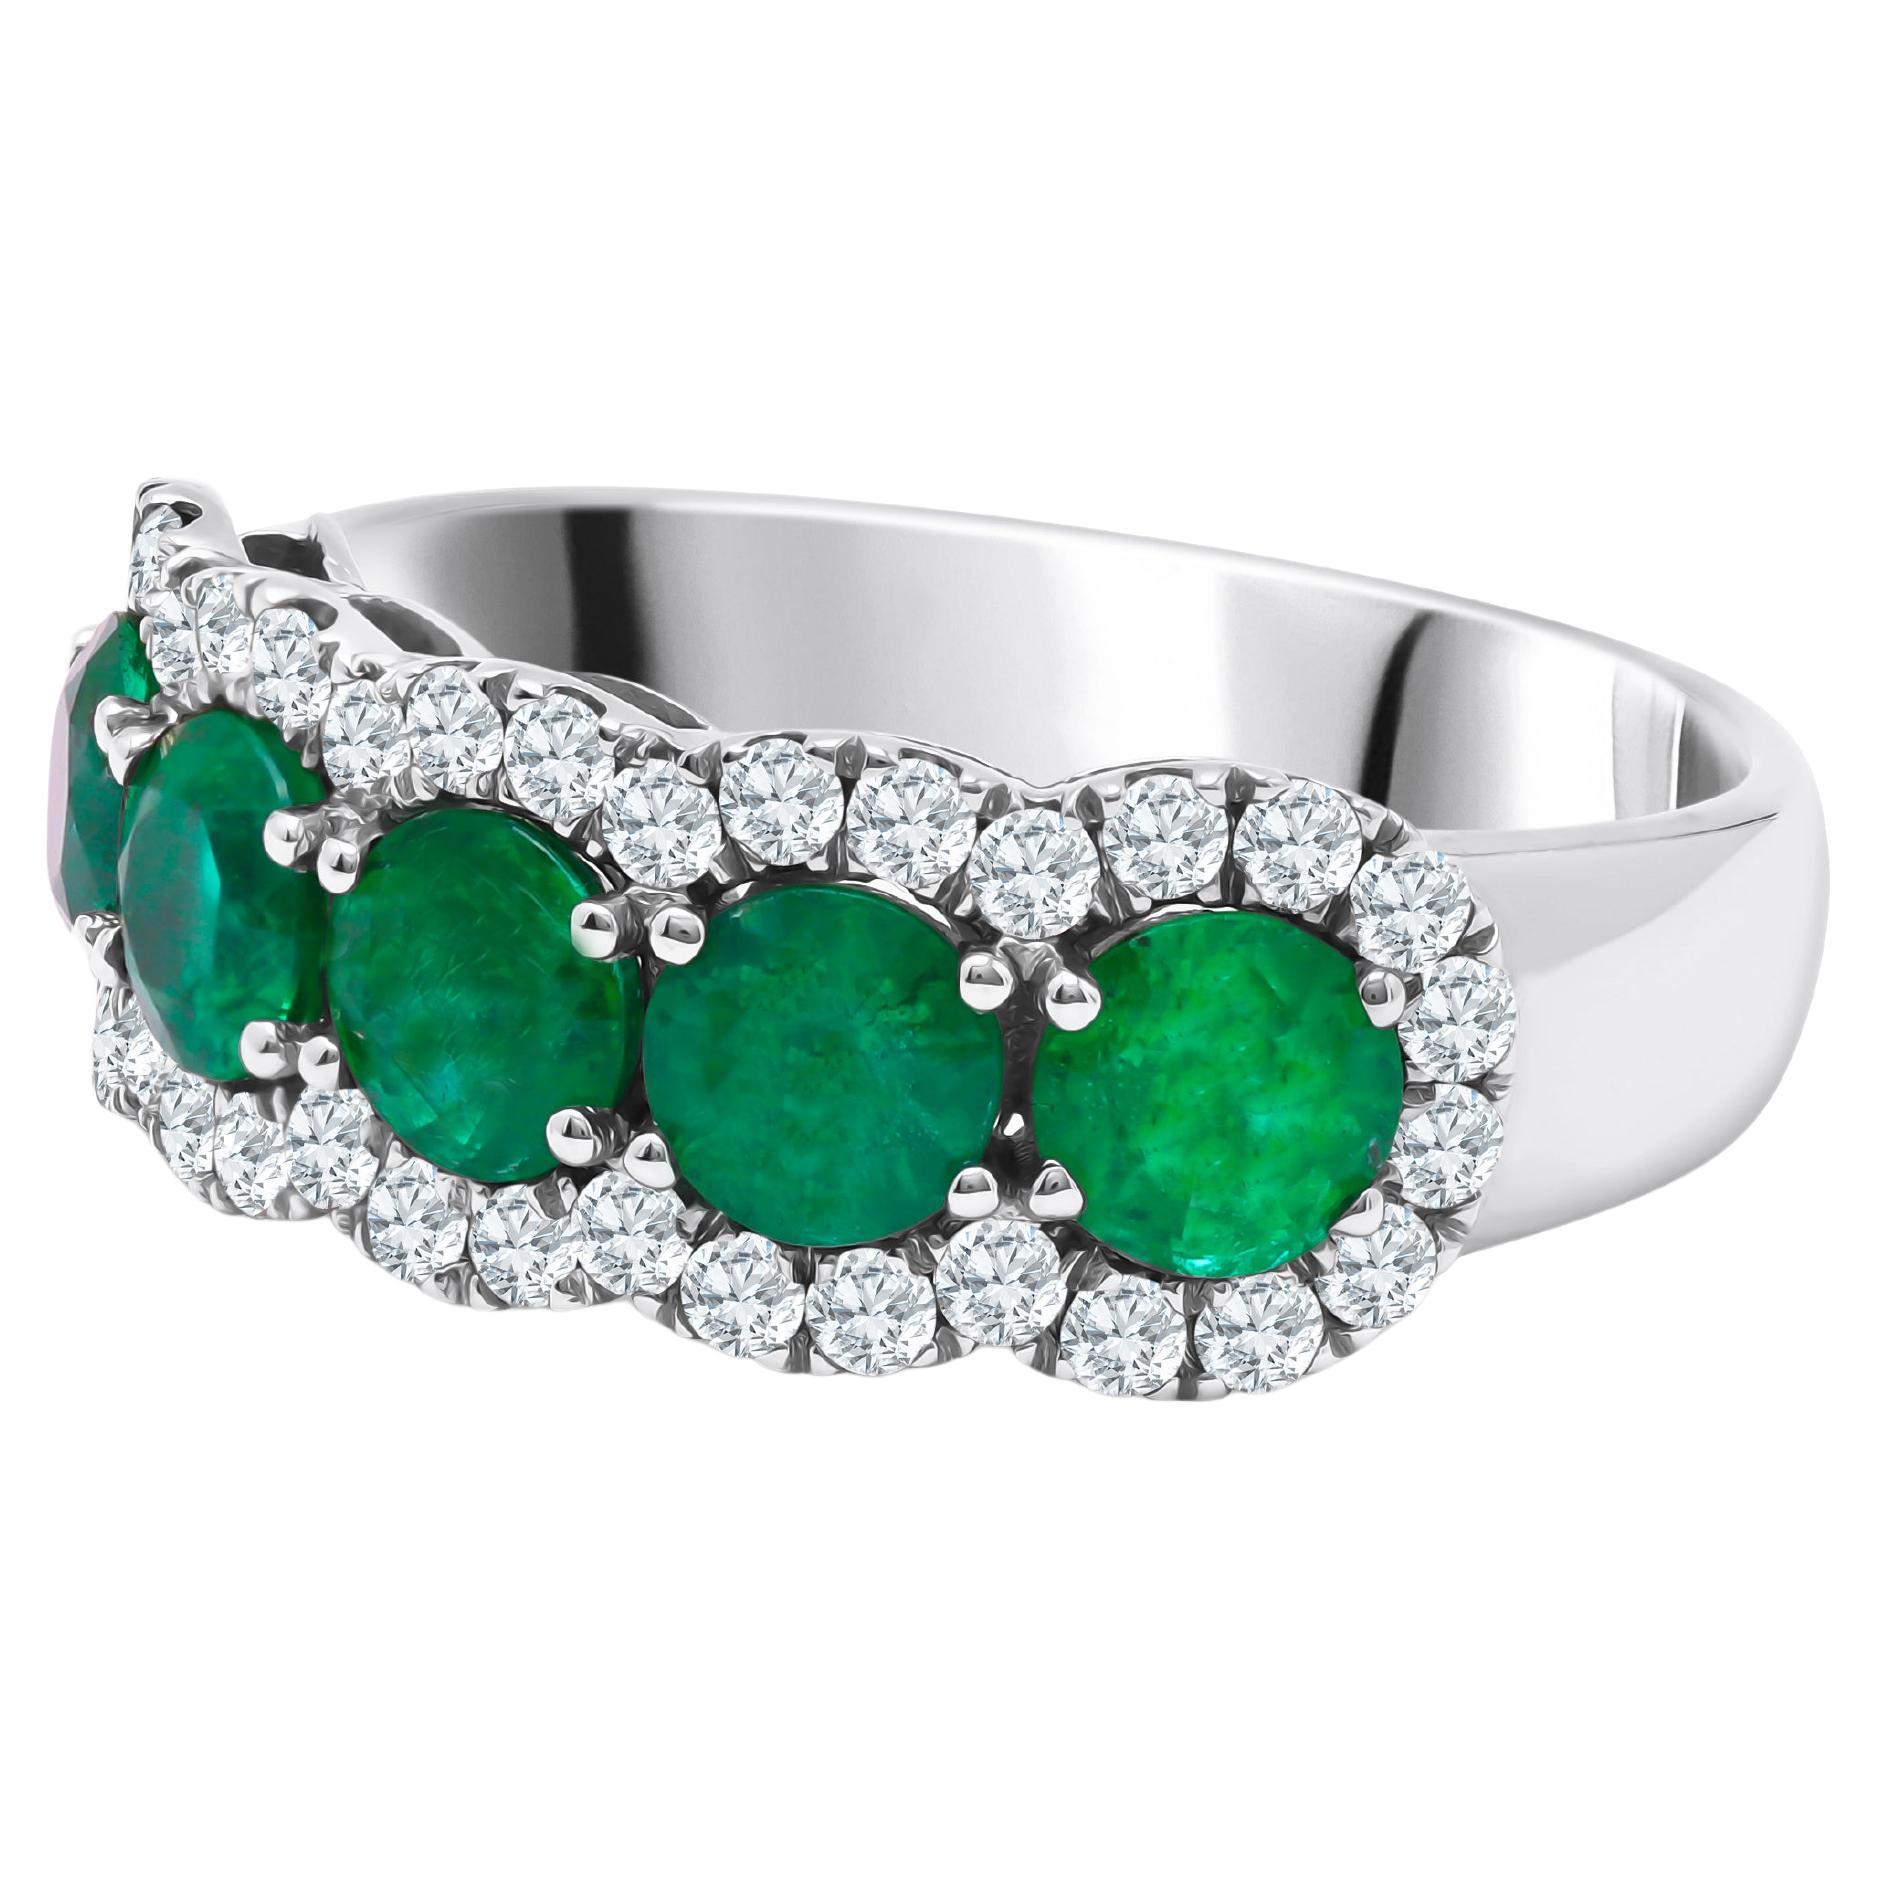 1.79 Carat Emerald Ring with 0.55 Carats Diamond in 18k White Gold ref1505